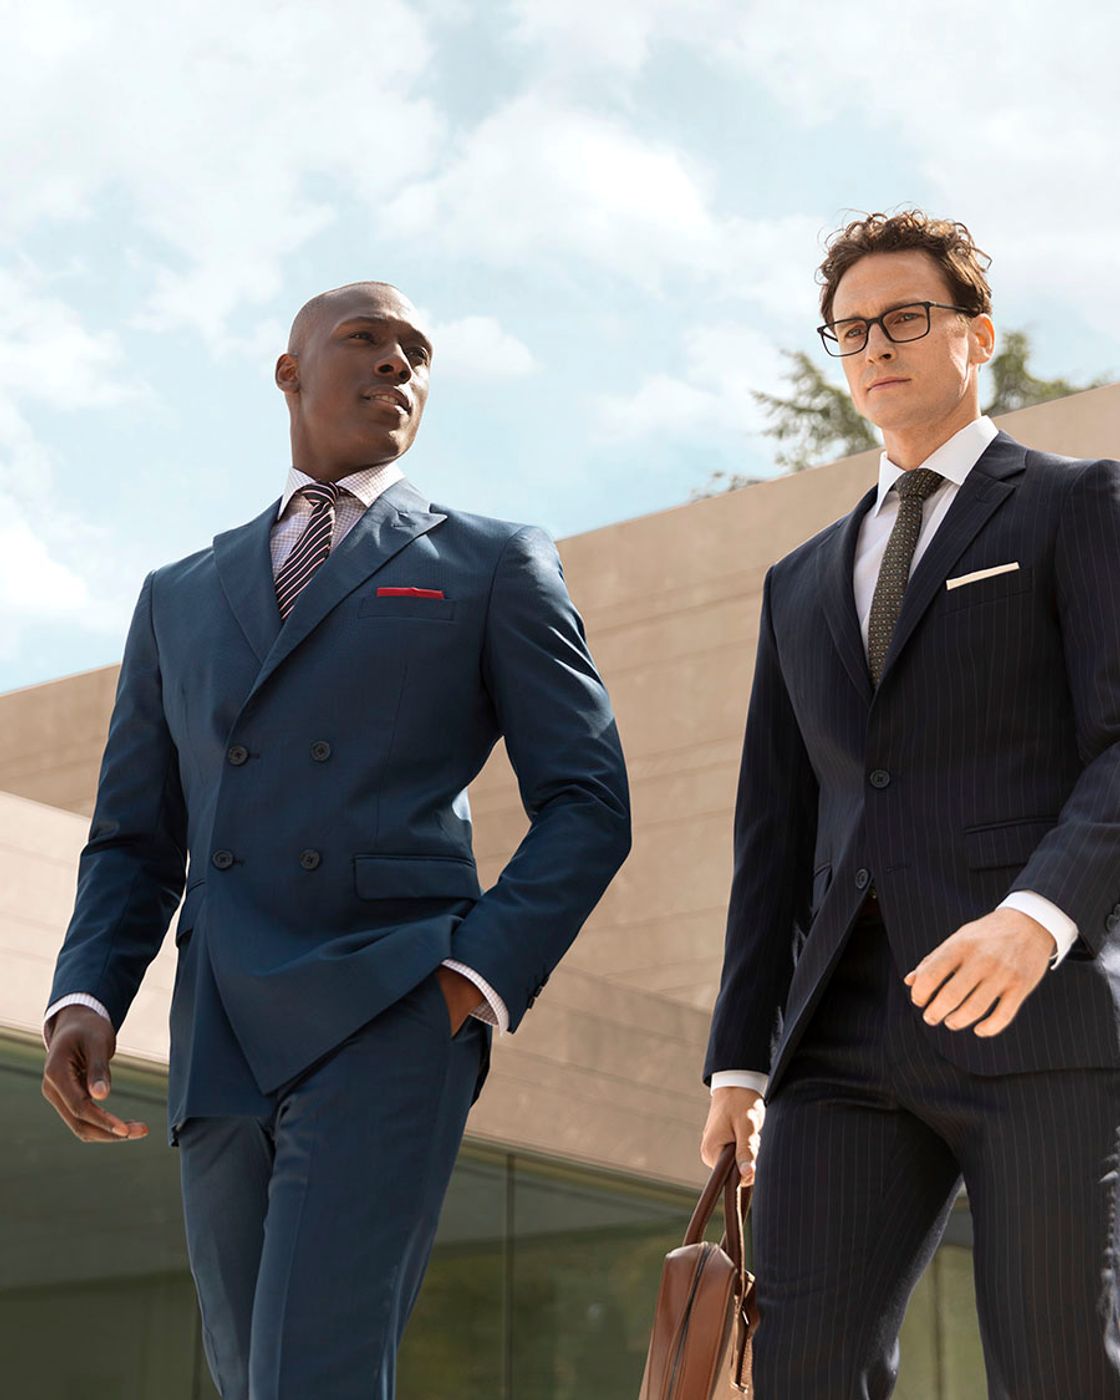 A Guide To Social Dress Codes For Men: Business, Formal, Optional